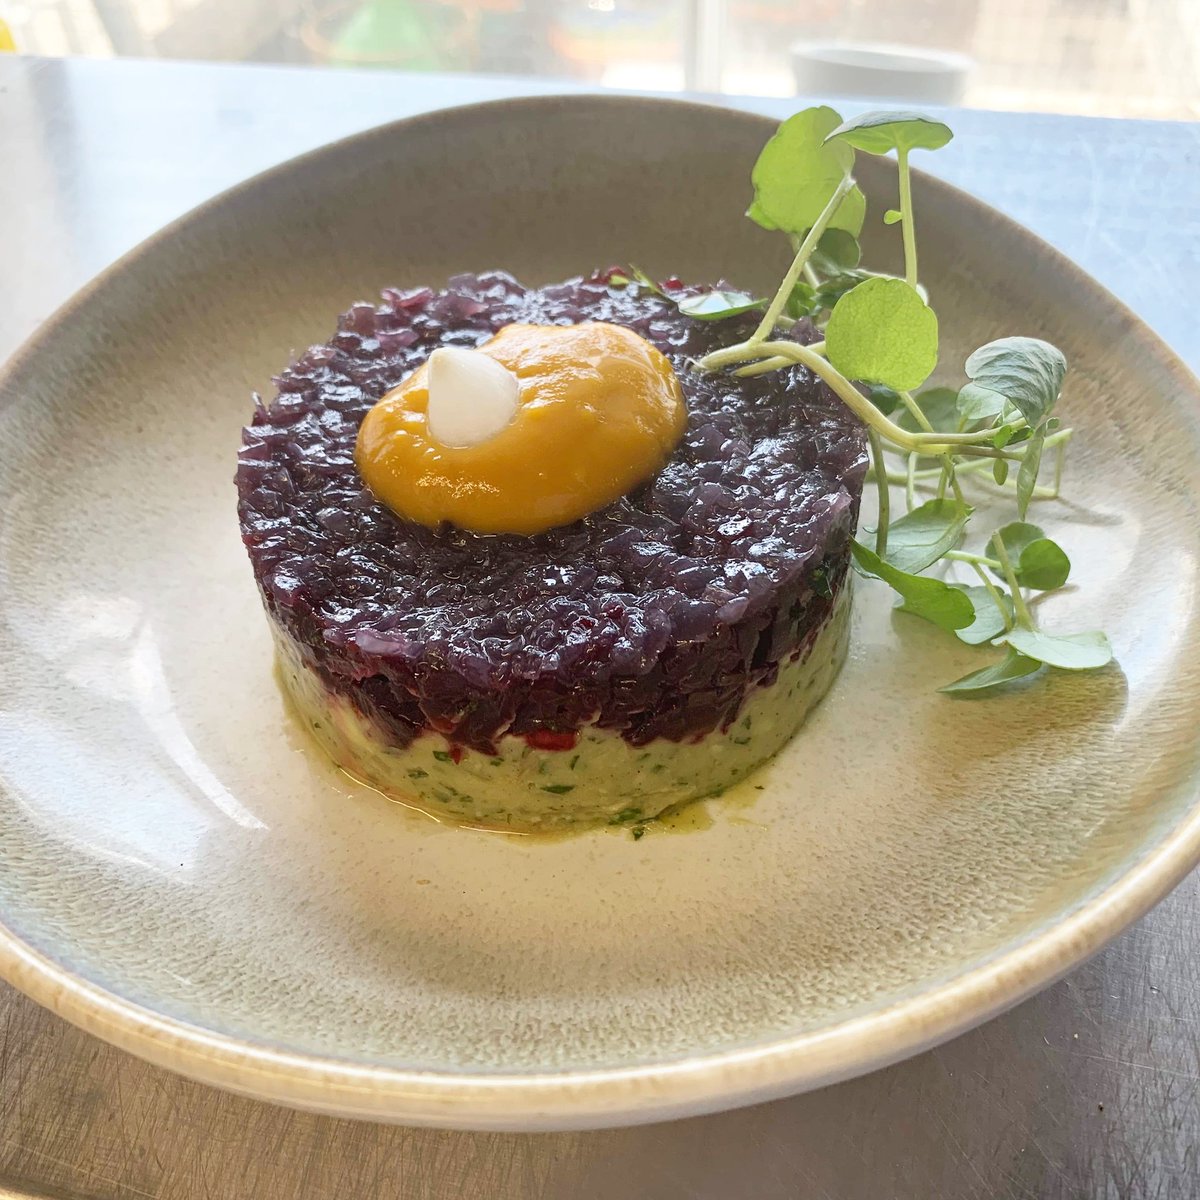 Have you tried our plant based beetroot and avocado tartare yet?
.
.
.
.
#vegan #veganbrighton #restaurantsbrighton #visitbrighton #thewalrus #thewalrusbrighton #veganblogger #instavegan #instafood #picoftheday